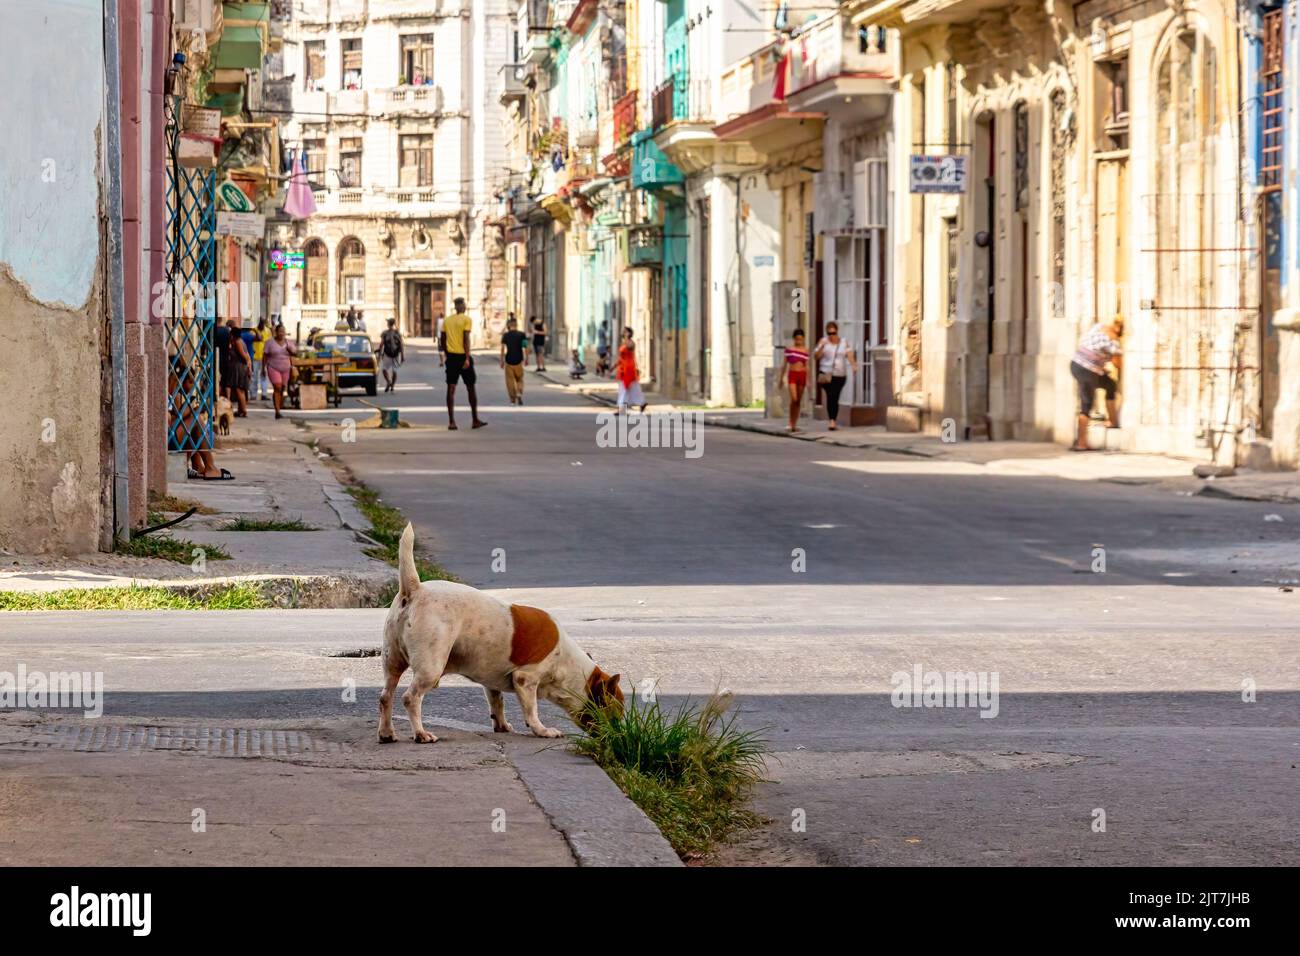 A dog smell something in a city street corner. In the background, the routine of a city neighborhood during the daytime. Stock Photo